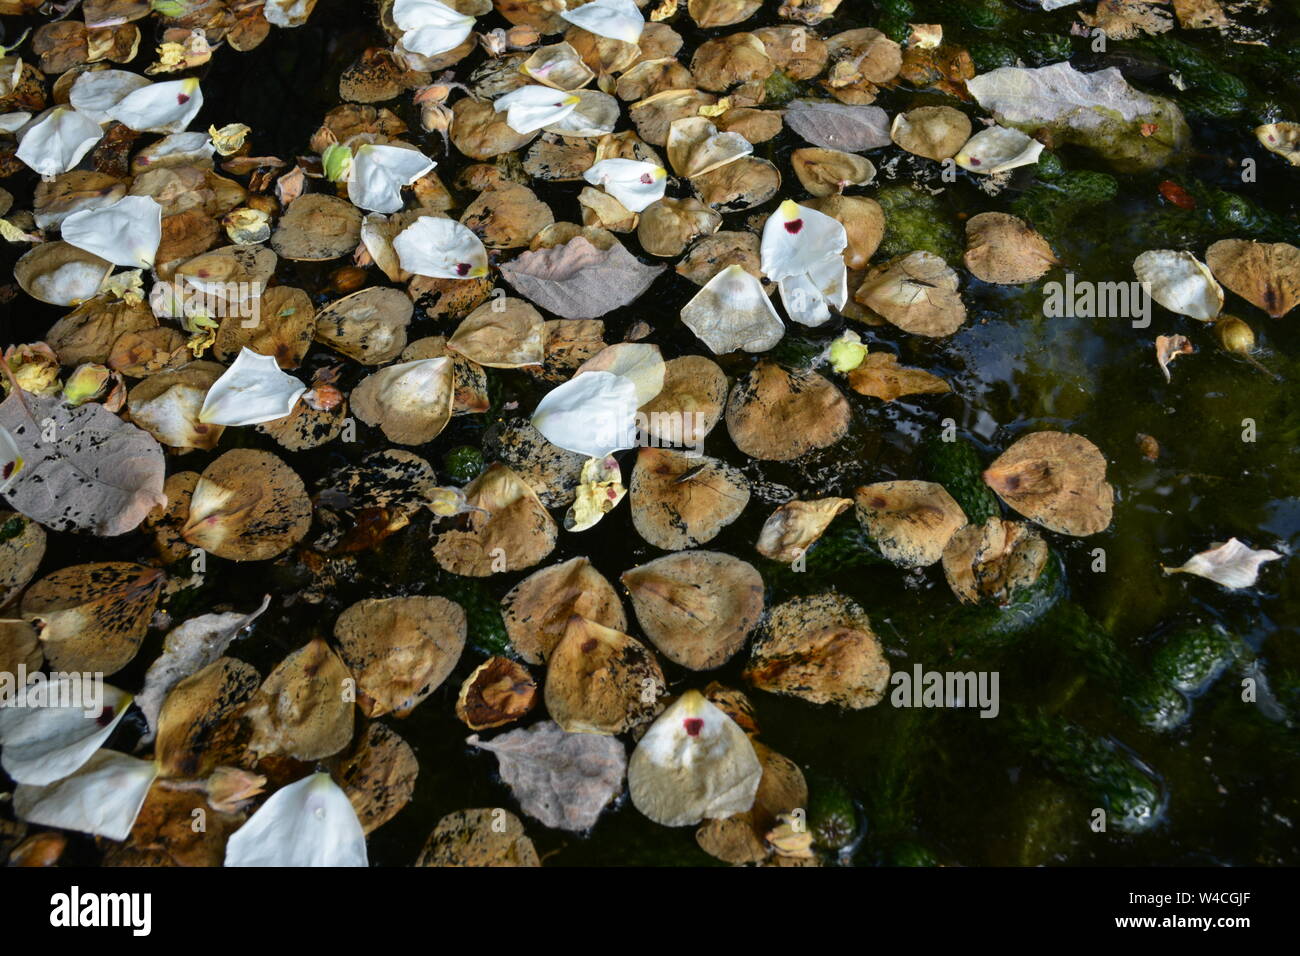 Close up of Rock Rose petals that have fallen off the tree into still water pond with some brown rotting leaves and some just fallen with some weed Stock Photo